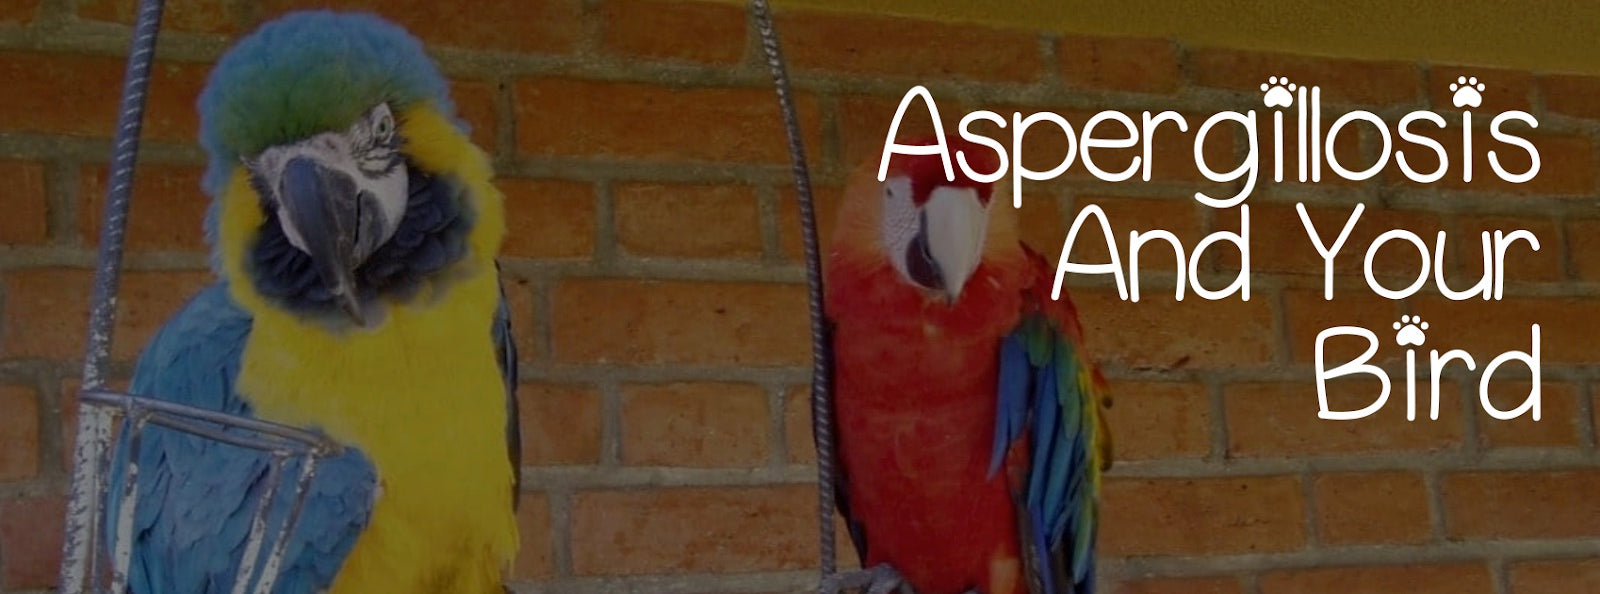 ASPERGILLOSIS AND YOUR BIRD